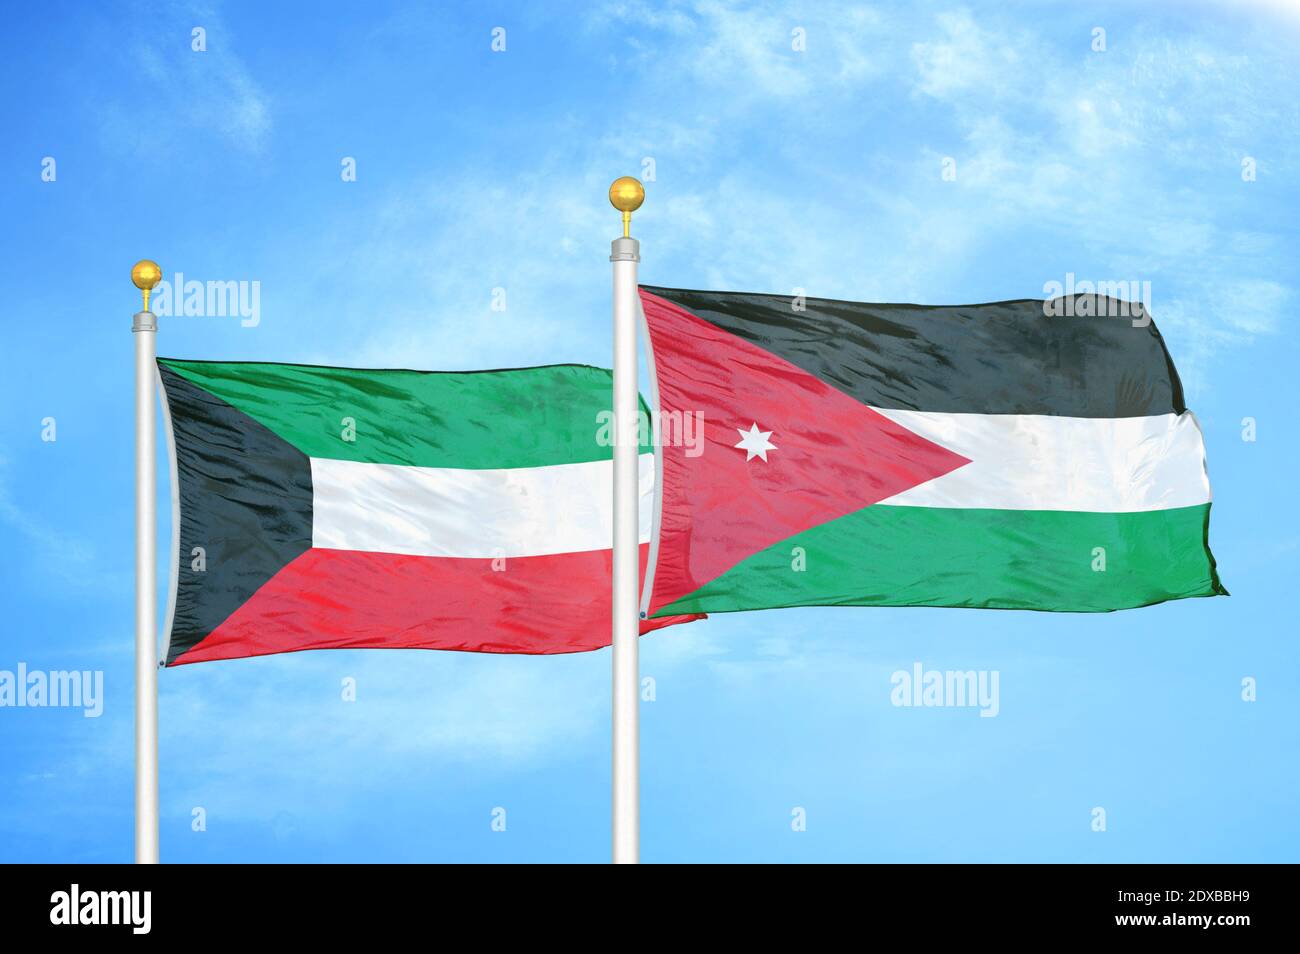 Kuwait Jordan High Resolution Stock Photography and Images - Alamy